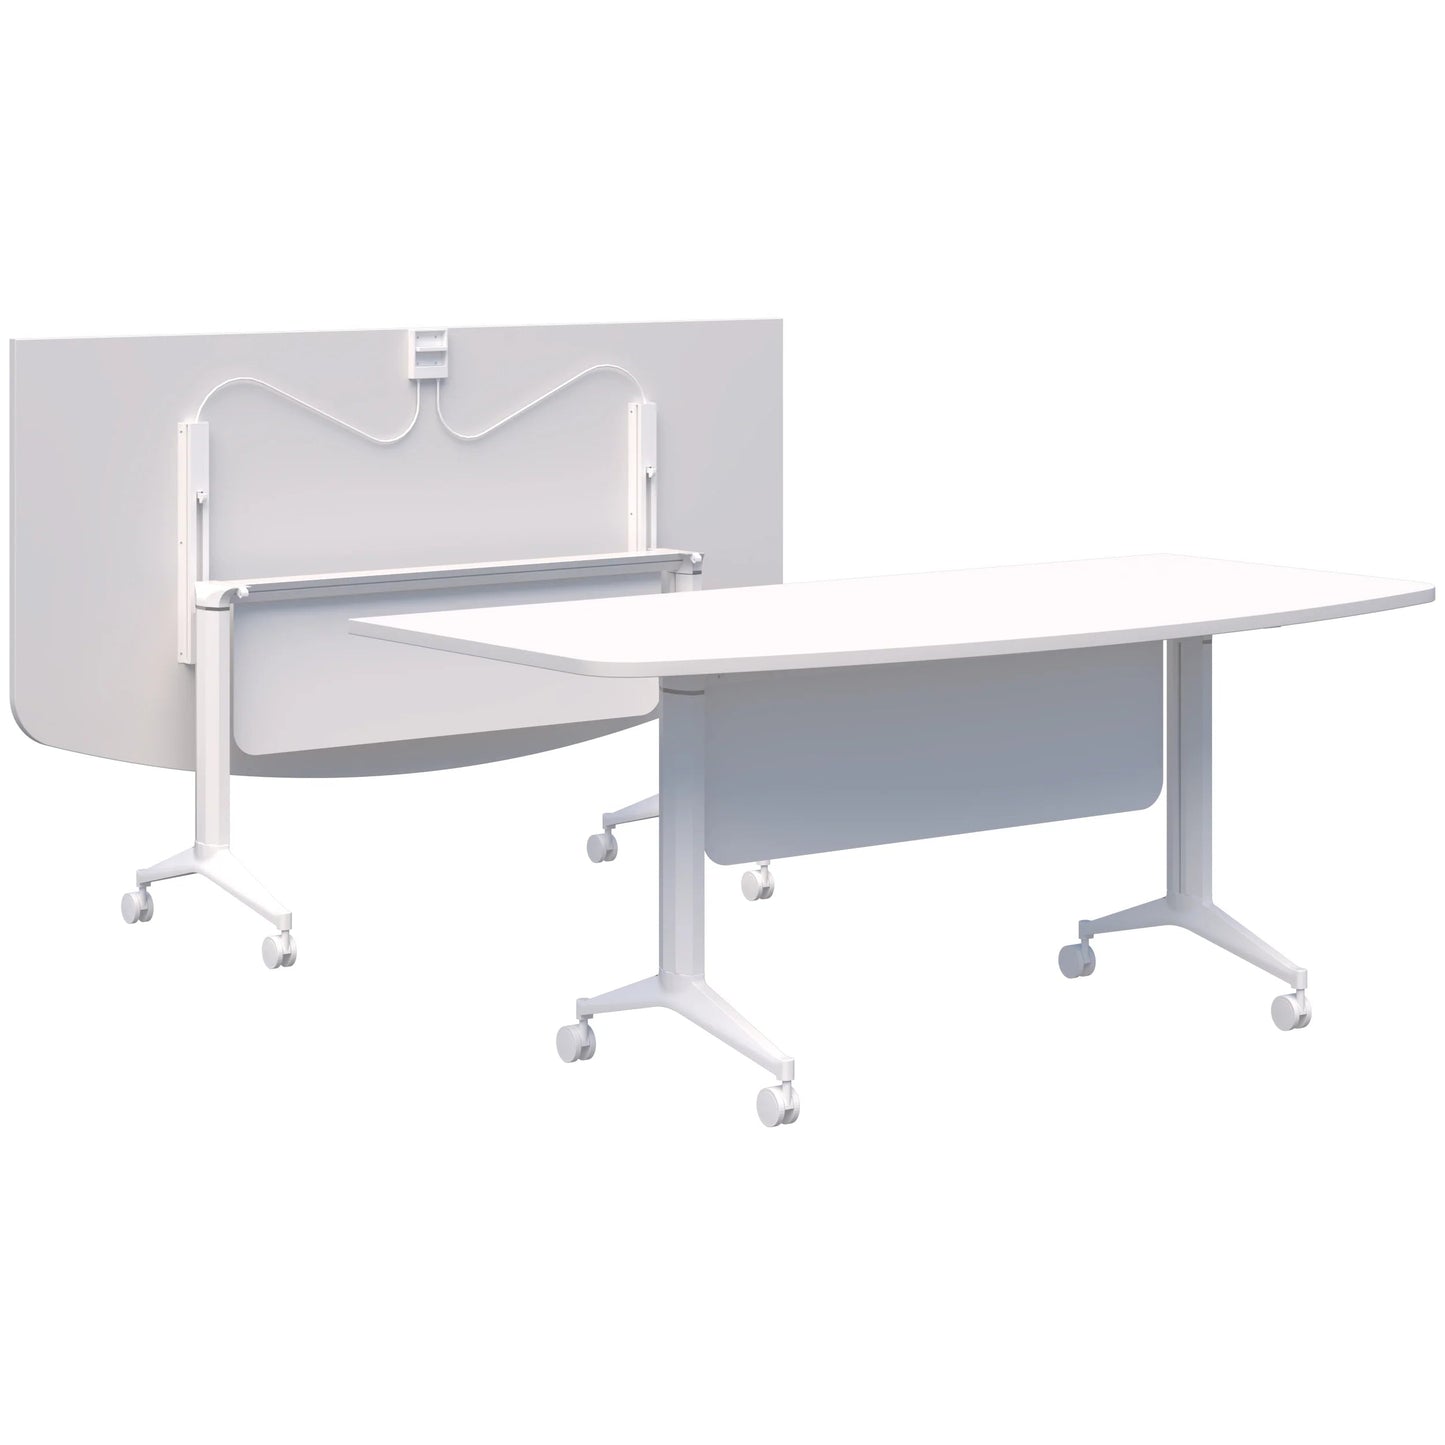 Boost Flip Table D-Shape Top with Modesty